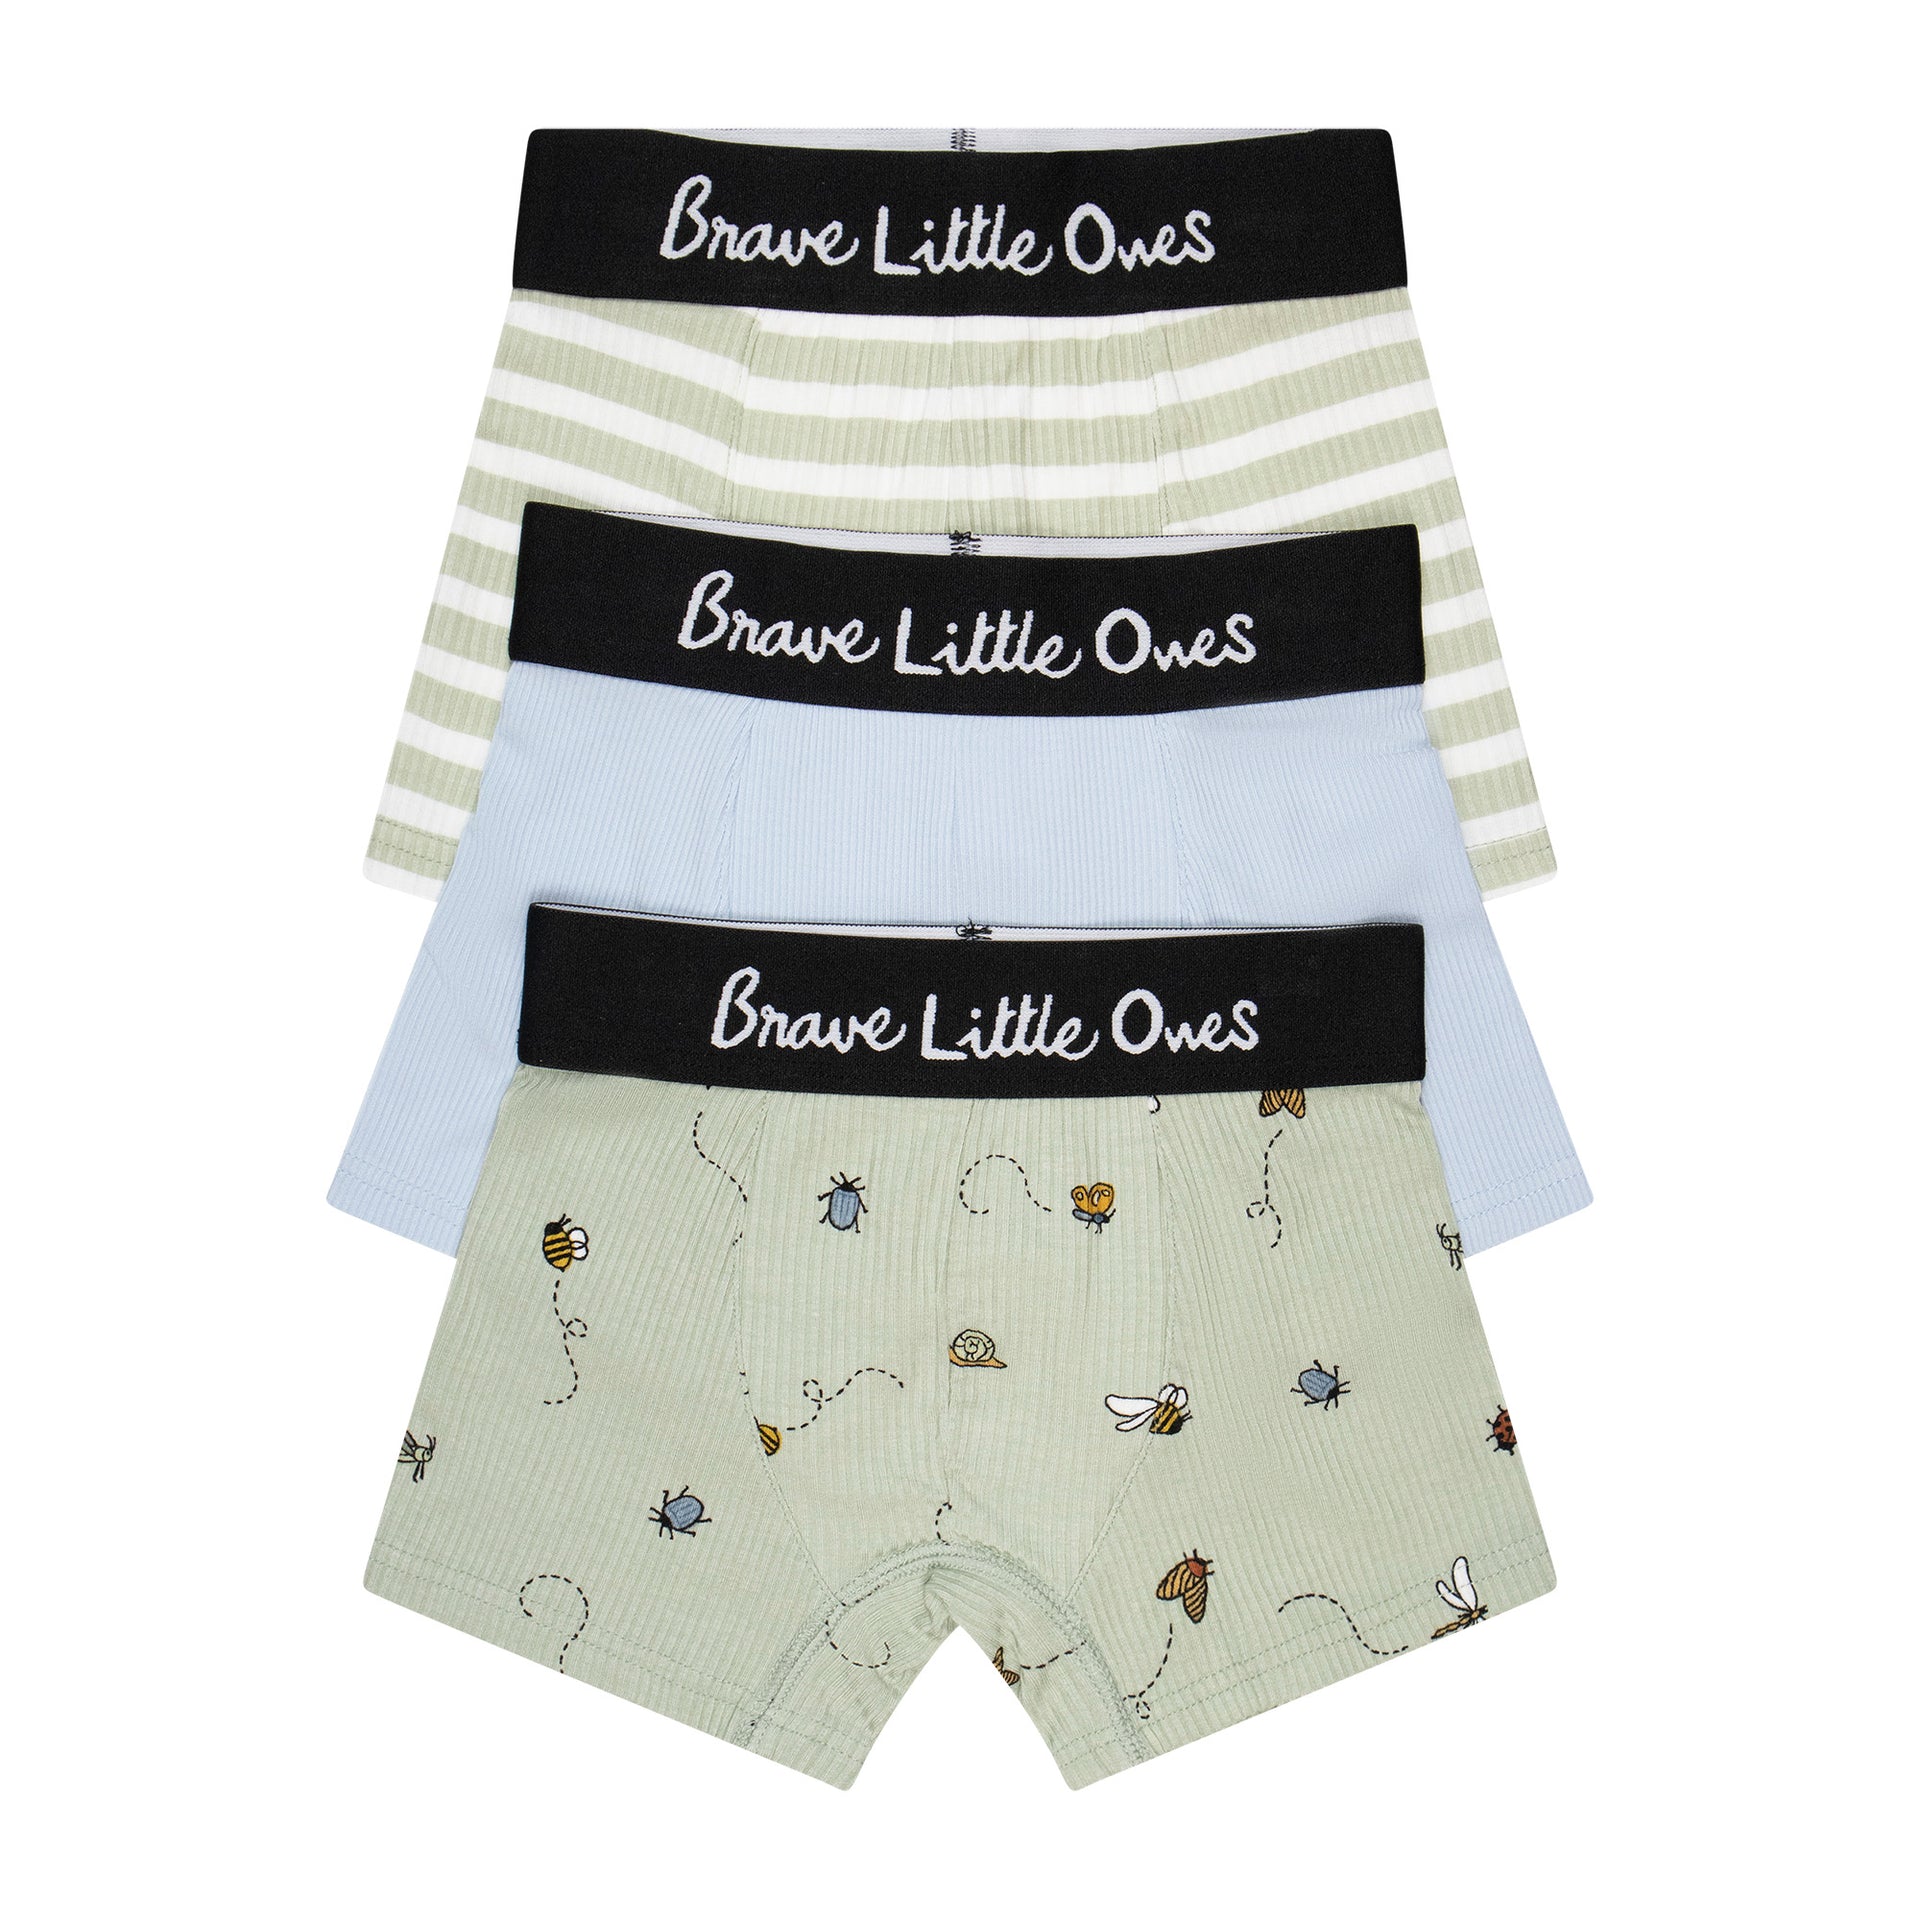 Three Lines & Forest Green Boxer Briefs 3 Pack – Brave Little Ones